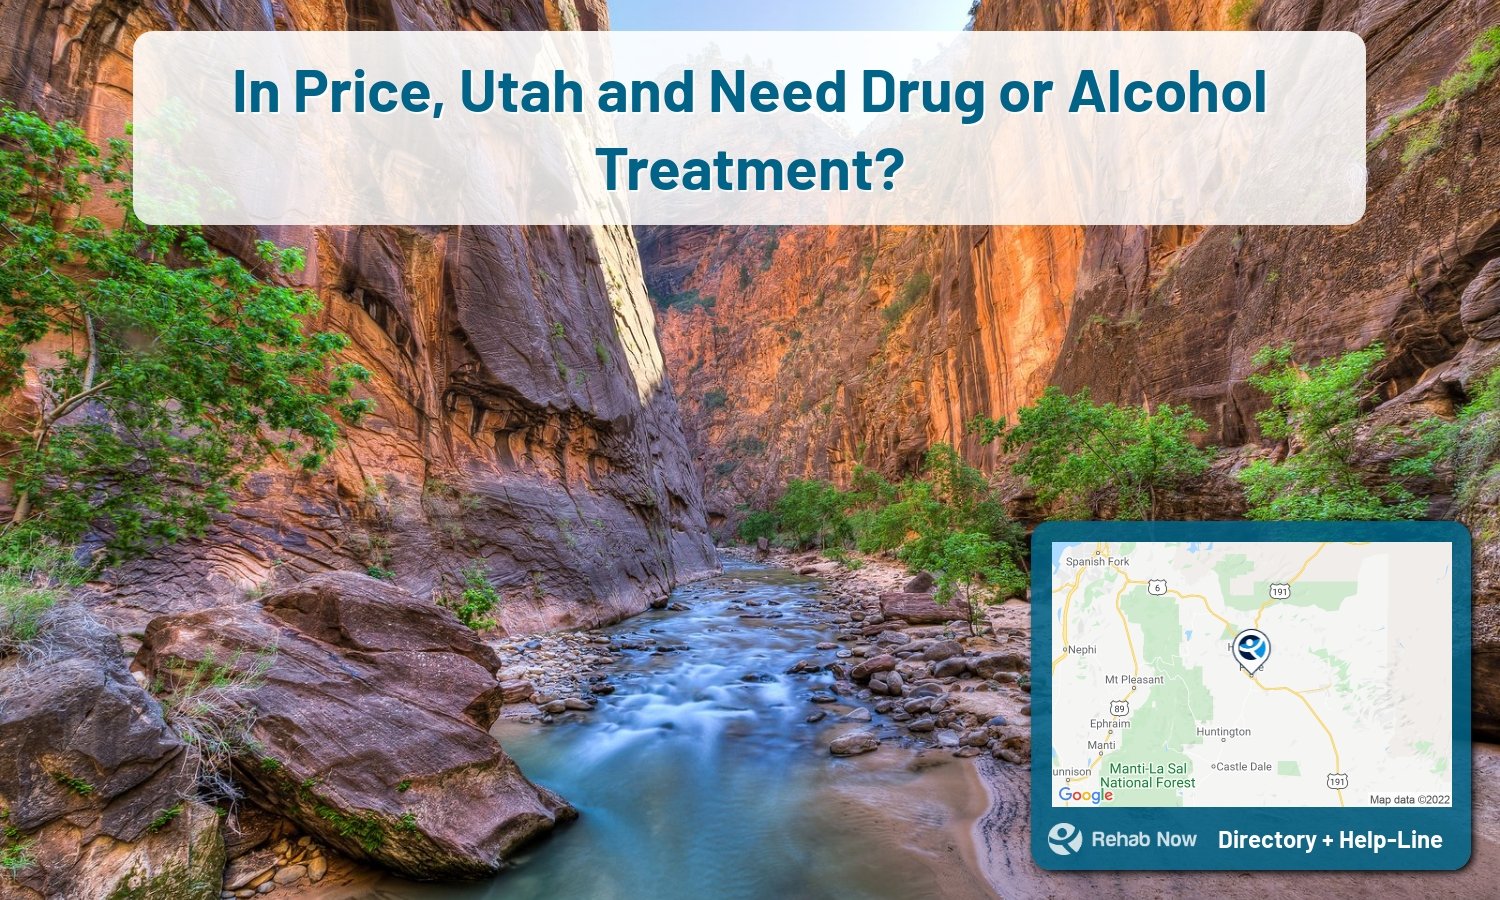 Our experts can help you find treatment now in Price, Utah. We list drug rehab and alcohol centers in Utah.